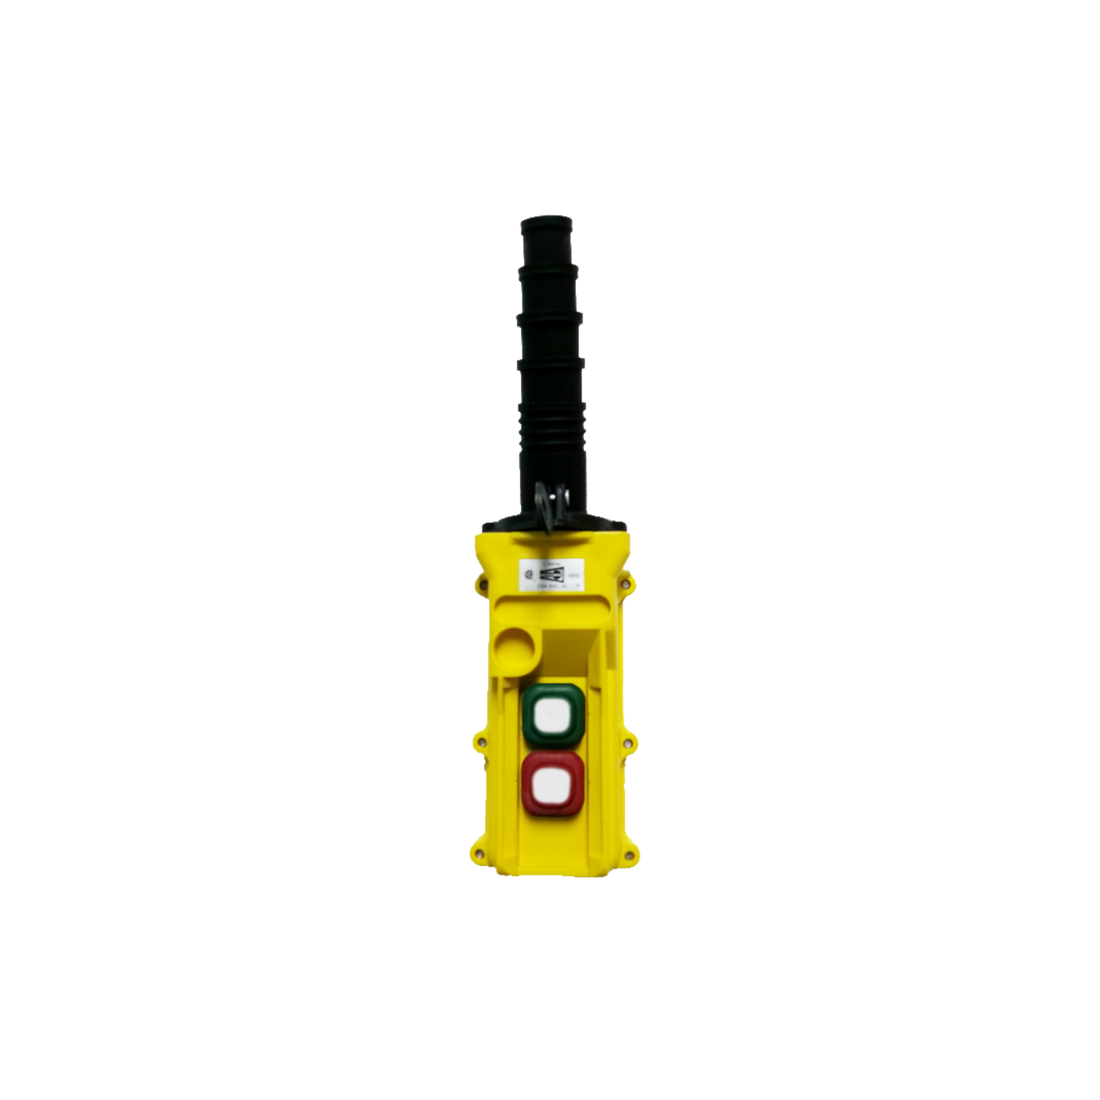 2-Button Pendant, Maintained & Momentary On/Off Switches (L2-S-A, L2-S-M) Yellow